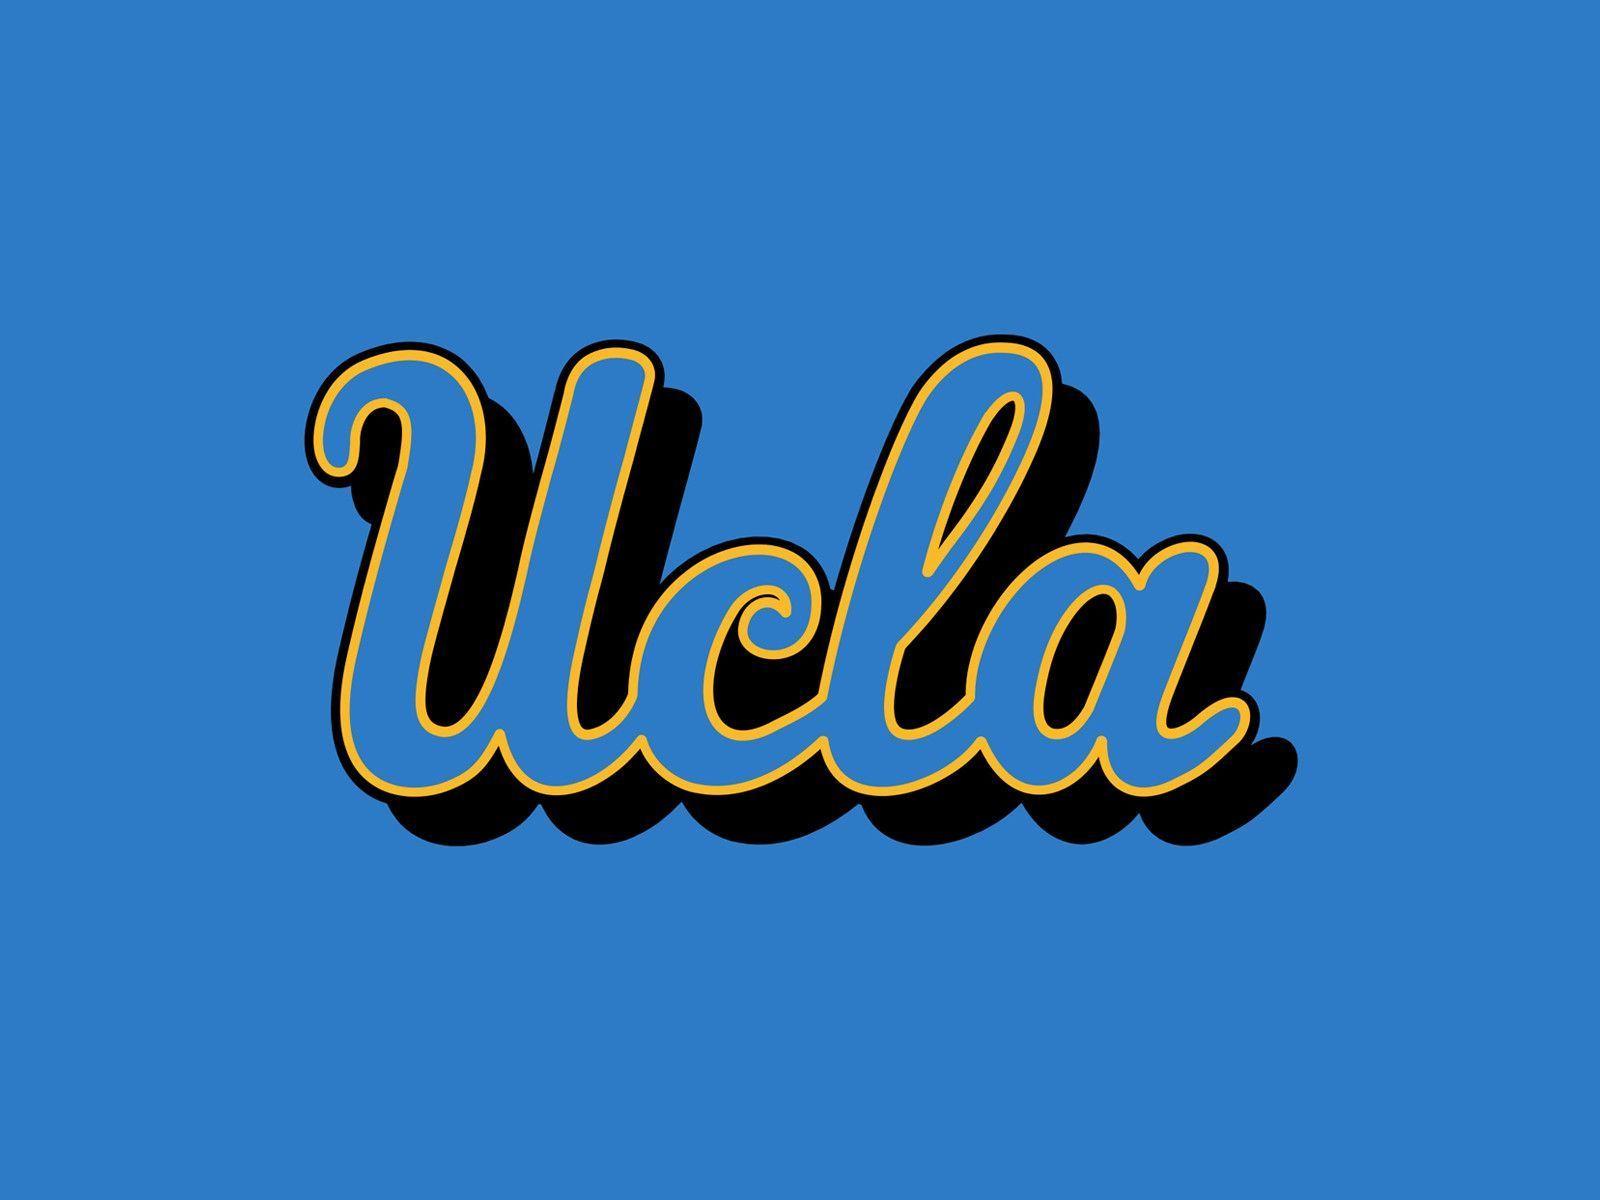 Related Picture Ucla Bruins iPhone Wallpaper Car Picture